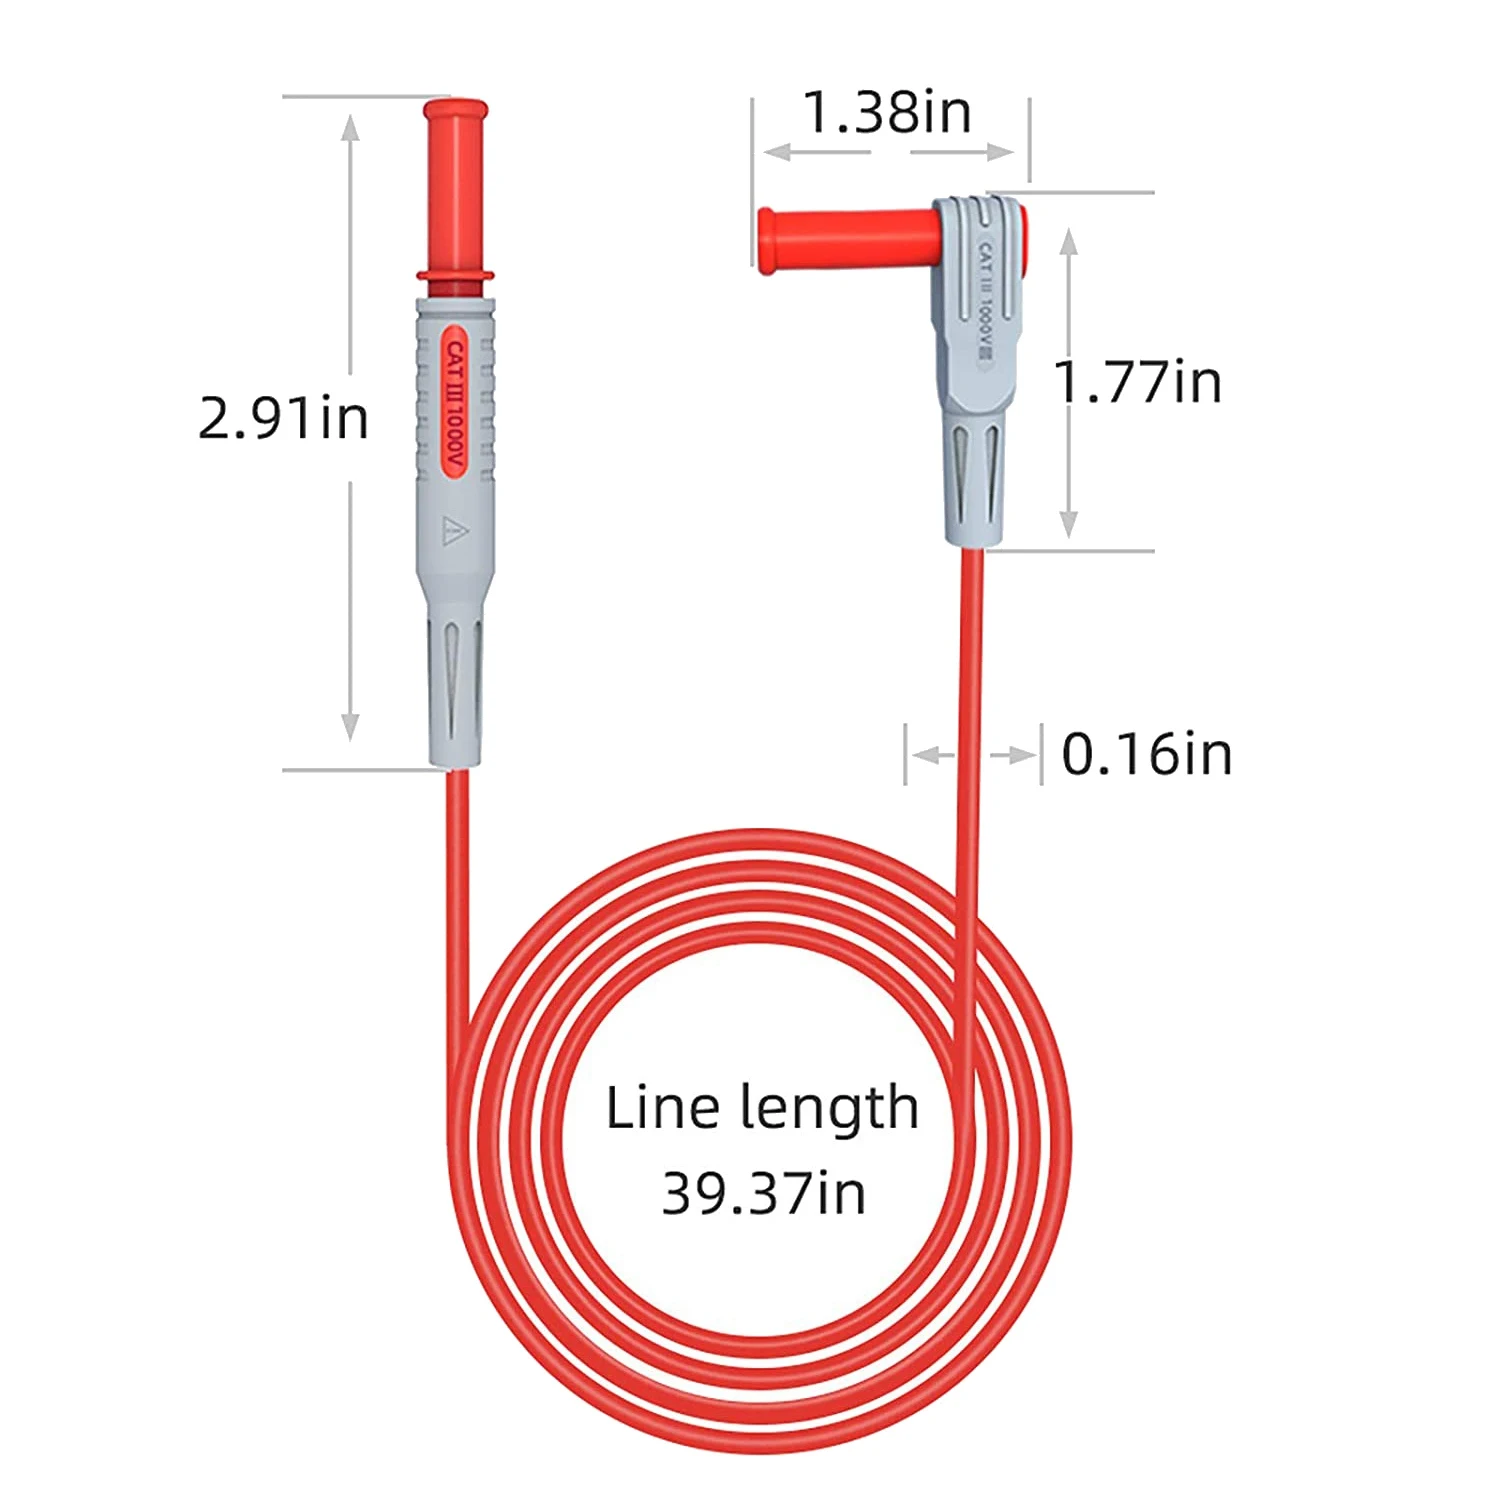 

2PCS Multimeter Test Leads 4mm Banana Plug Male to Male with Puncture Probes Wire-Piercing Test Clip Tool